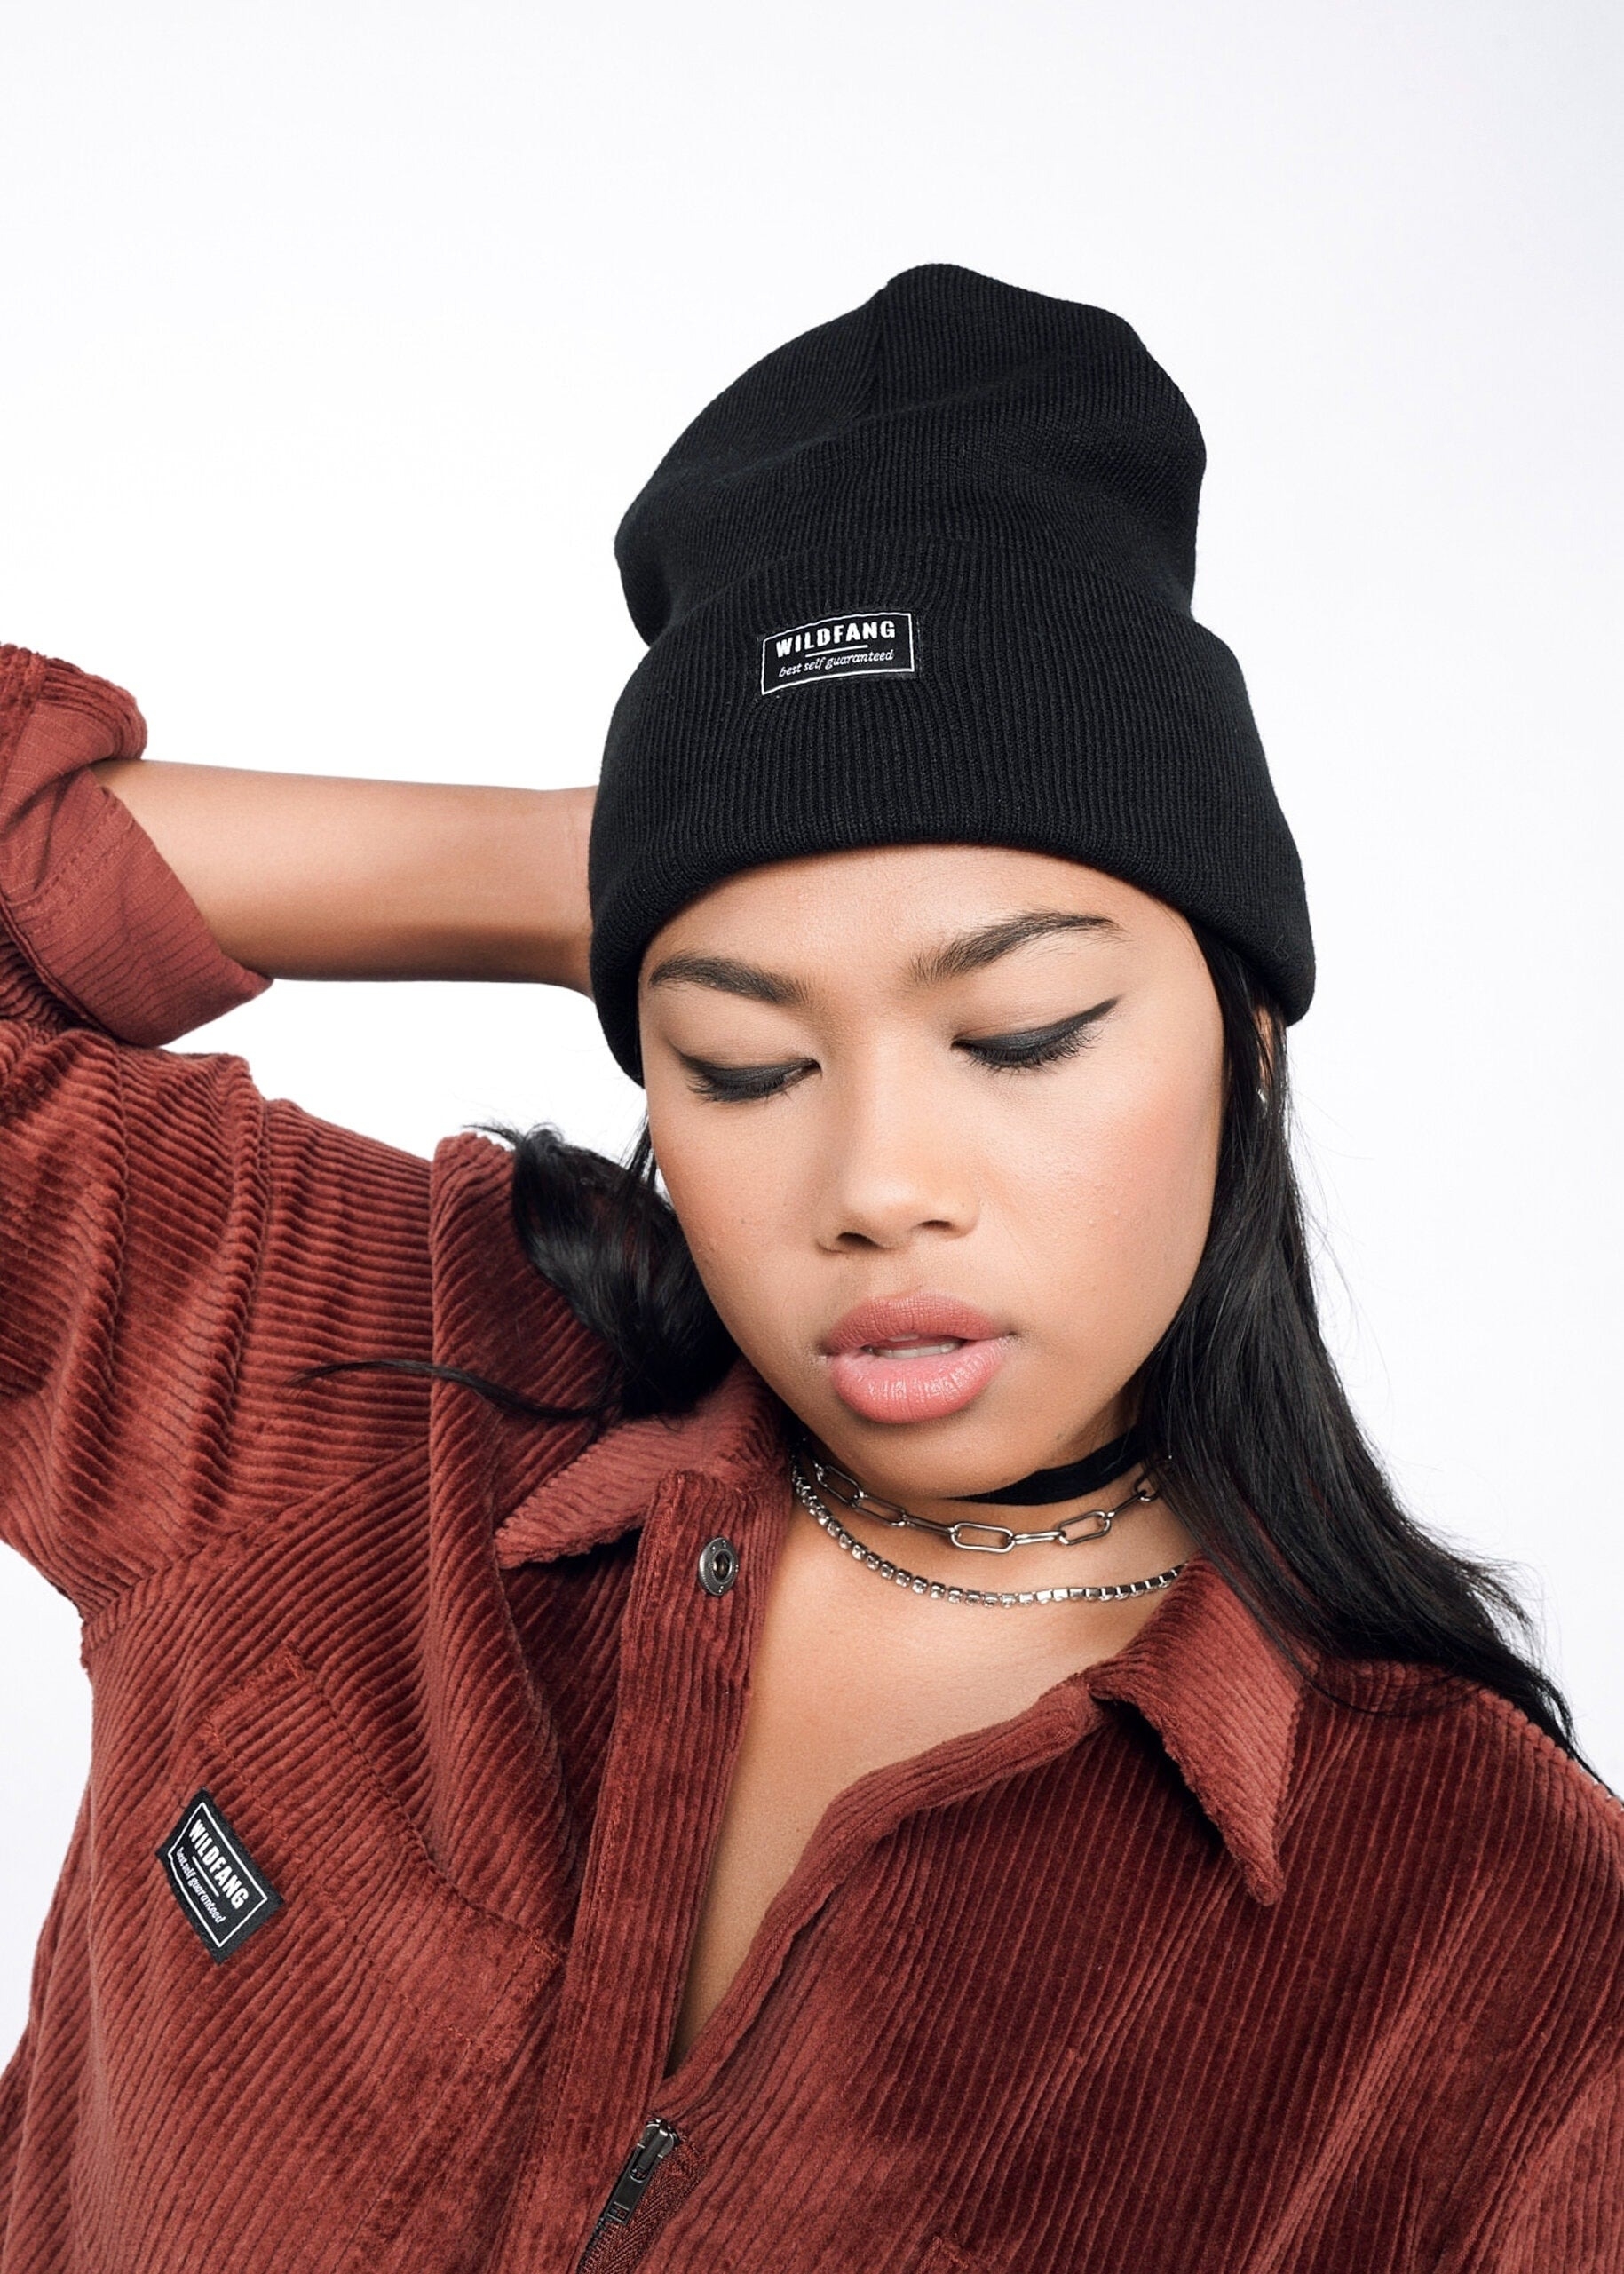 model wearing red Wildfang beanie